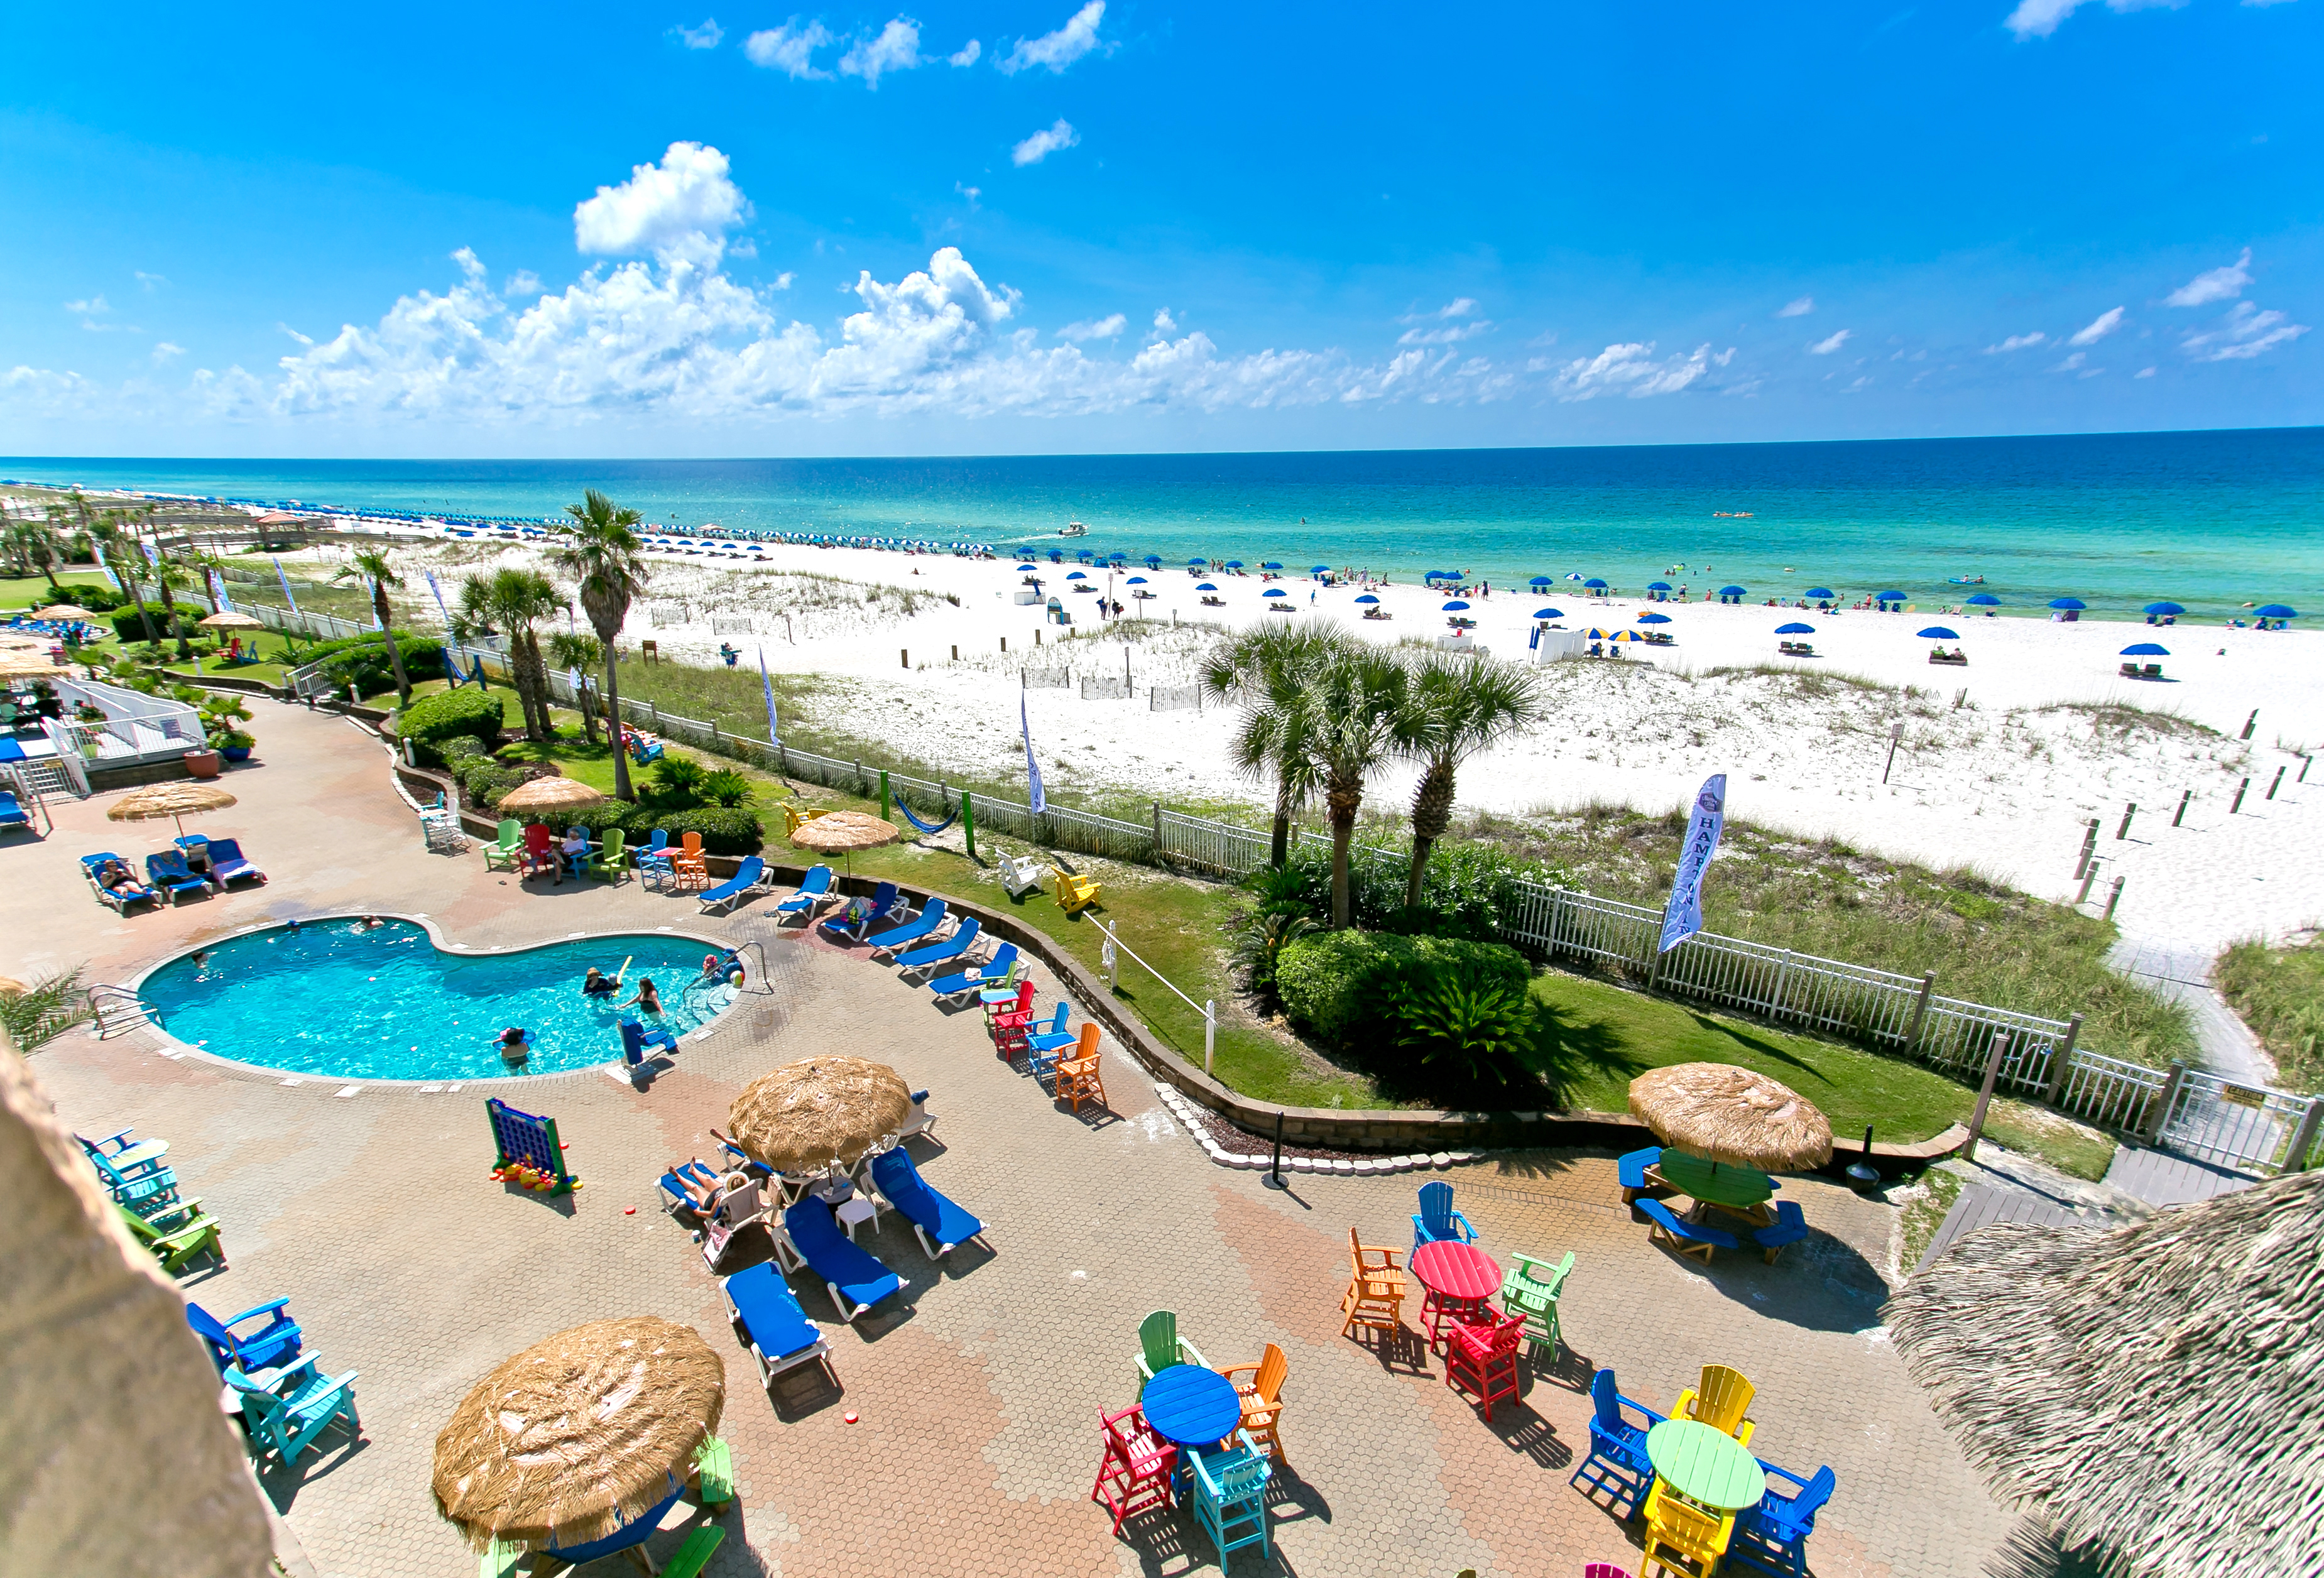 Discount [90% Off] Springhill Suites Pensacola Beach United States